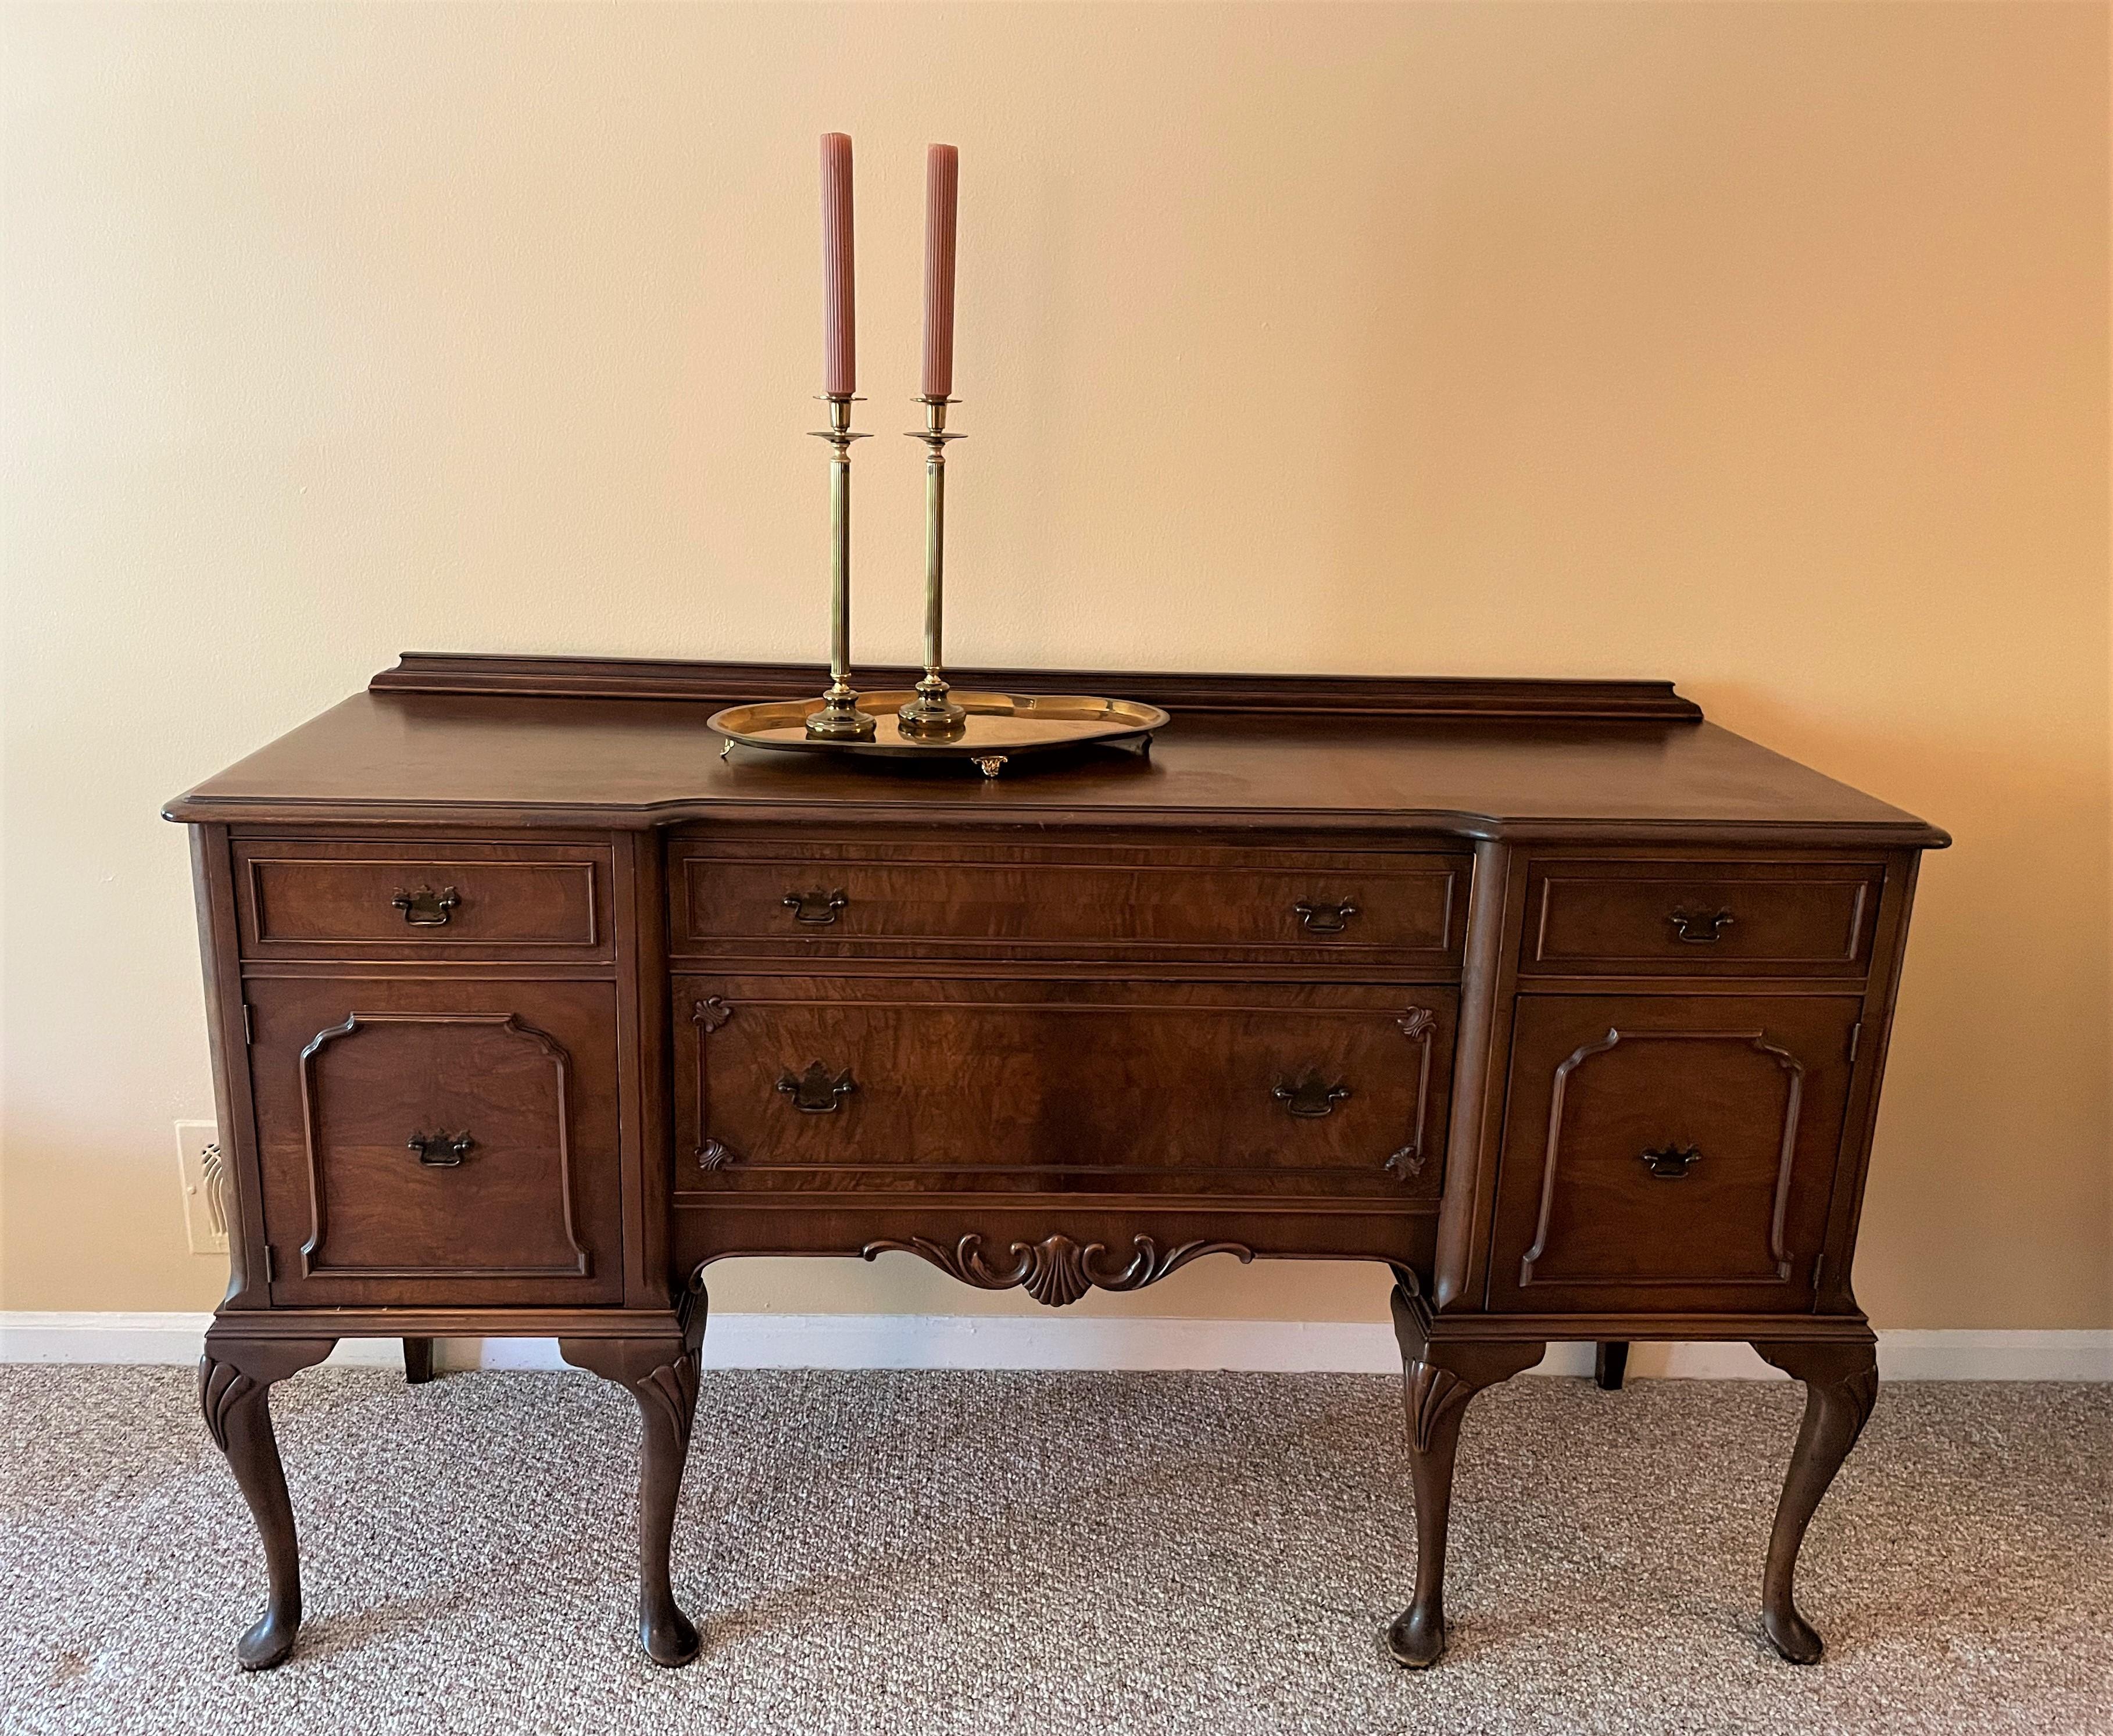 This is a stately piece from the 1930s, and one that is in extraordinarily excellent condition. It is a rare find having been made from solid walnut with burled wood on the front drawers. The wood (including the surface of the buffet) is beautifully